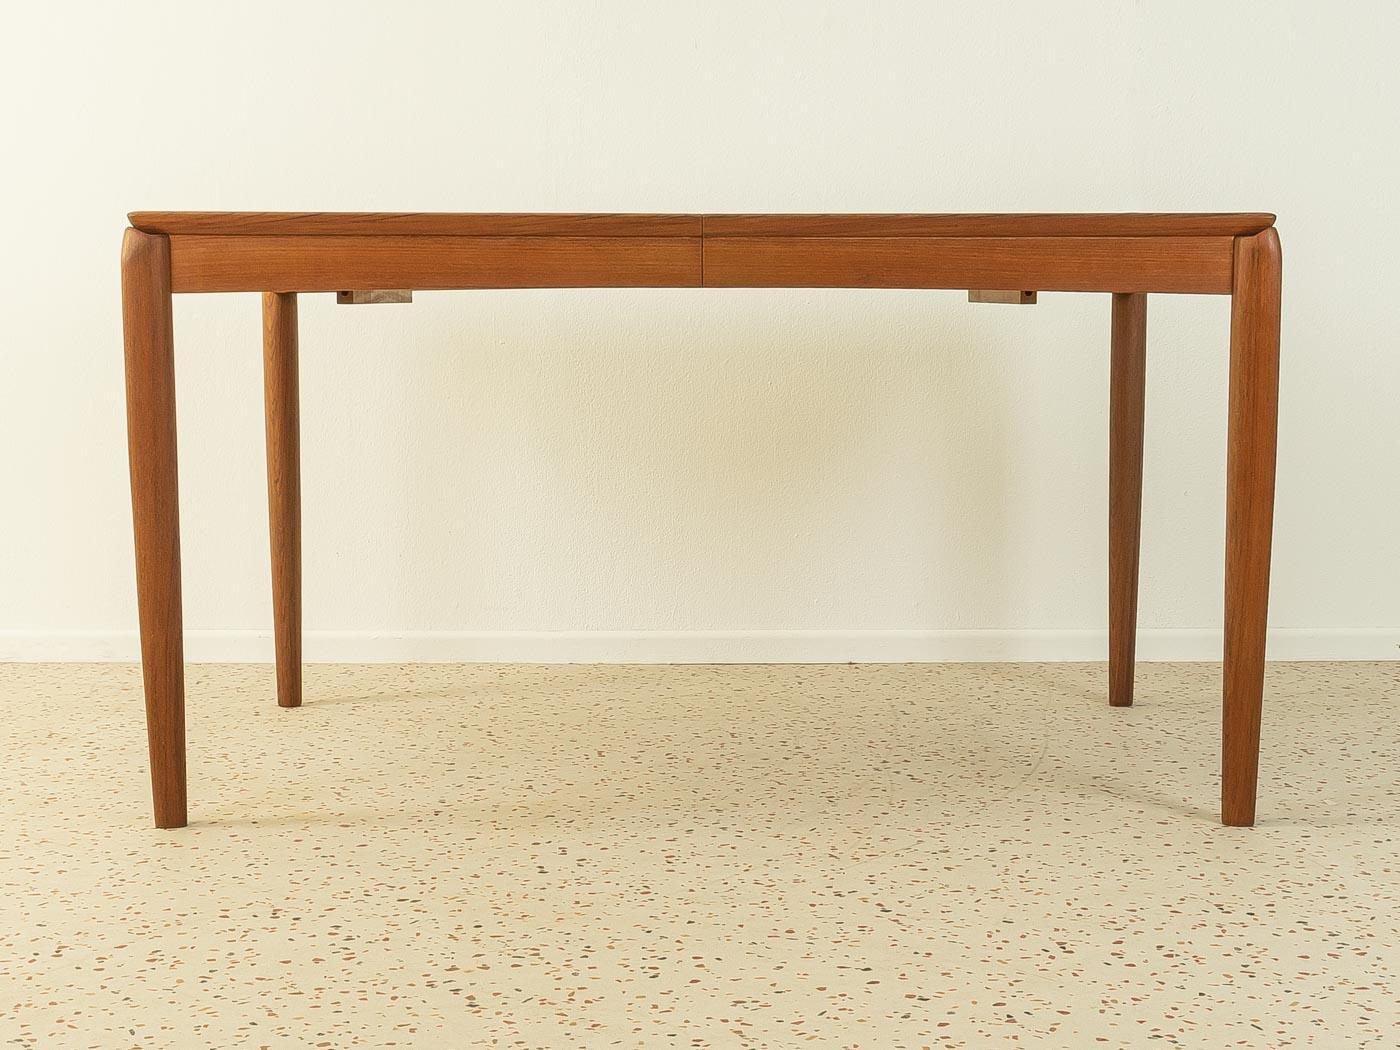 Danish Extendable Teak Dining Table from the 1960s by H.W. Klein for Bramin, Denmark